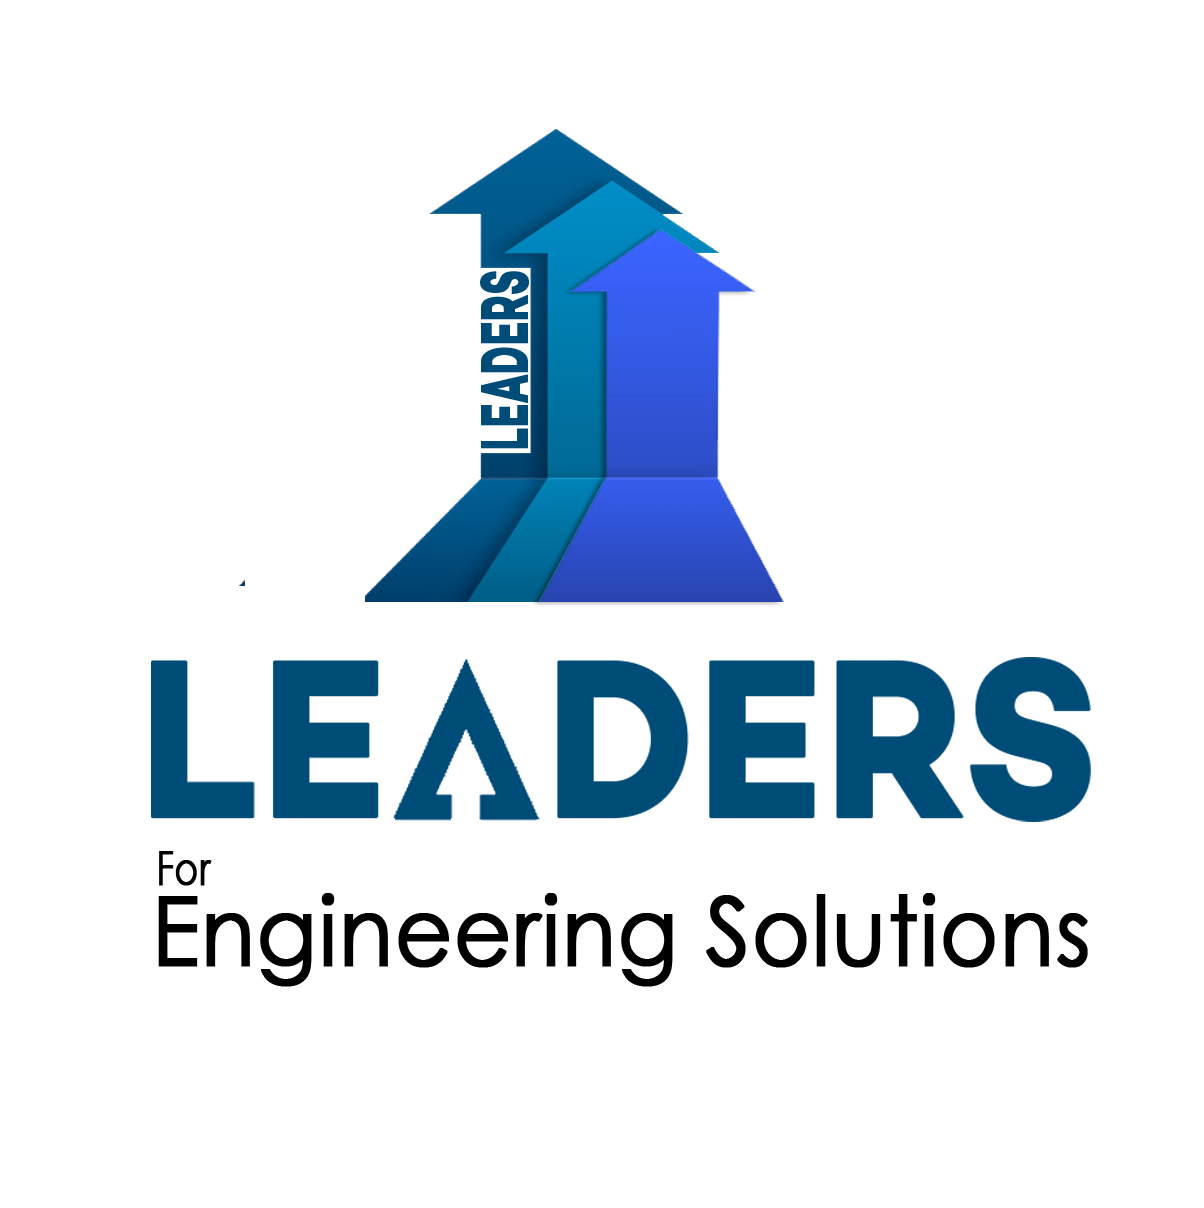 Leaders for Engineering Solutions